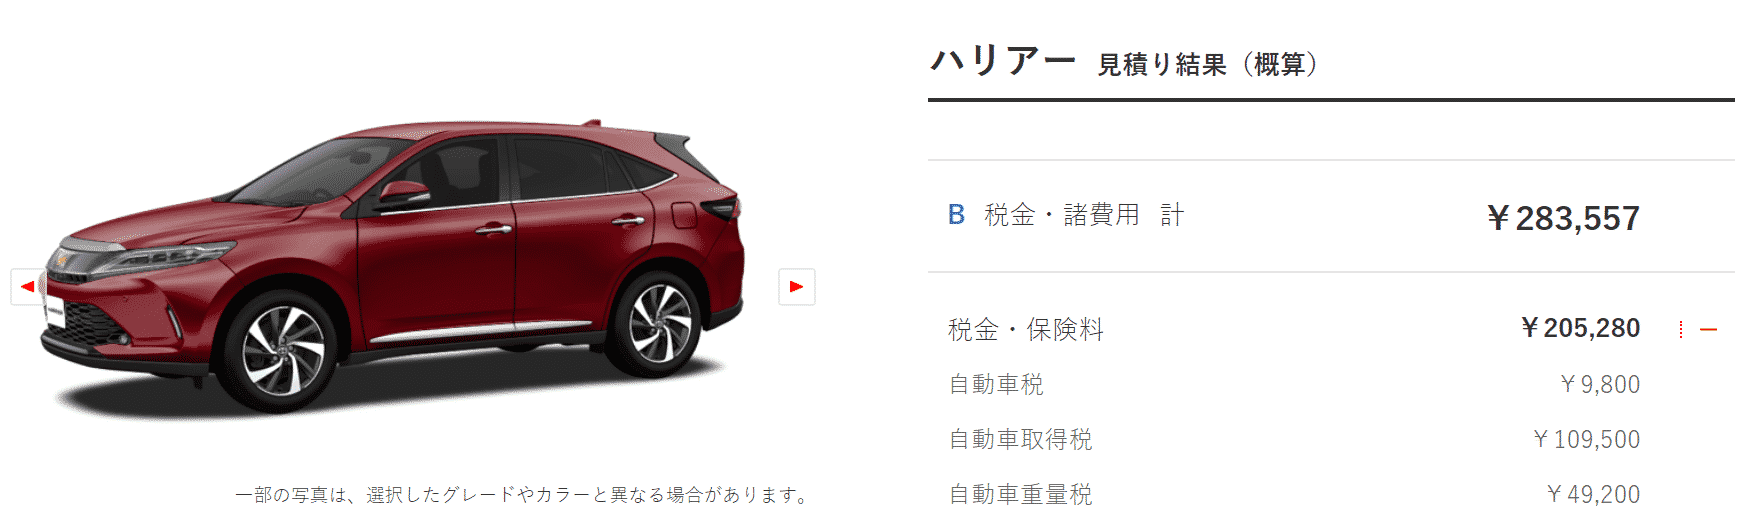 「PREMIUM “Metal and Leather Package”」ターボ車の税額画像